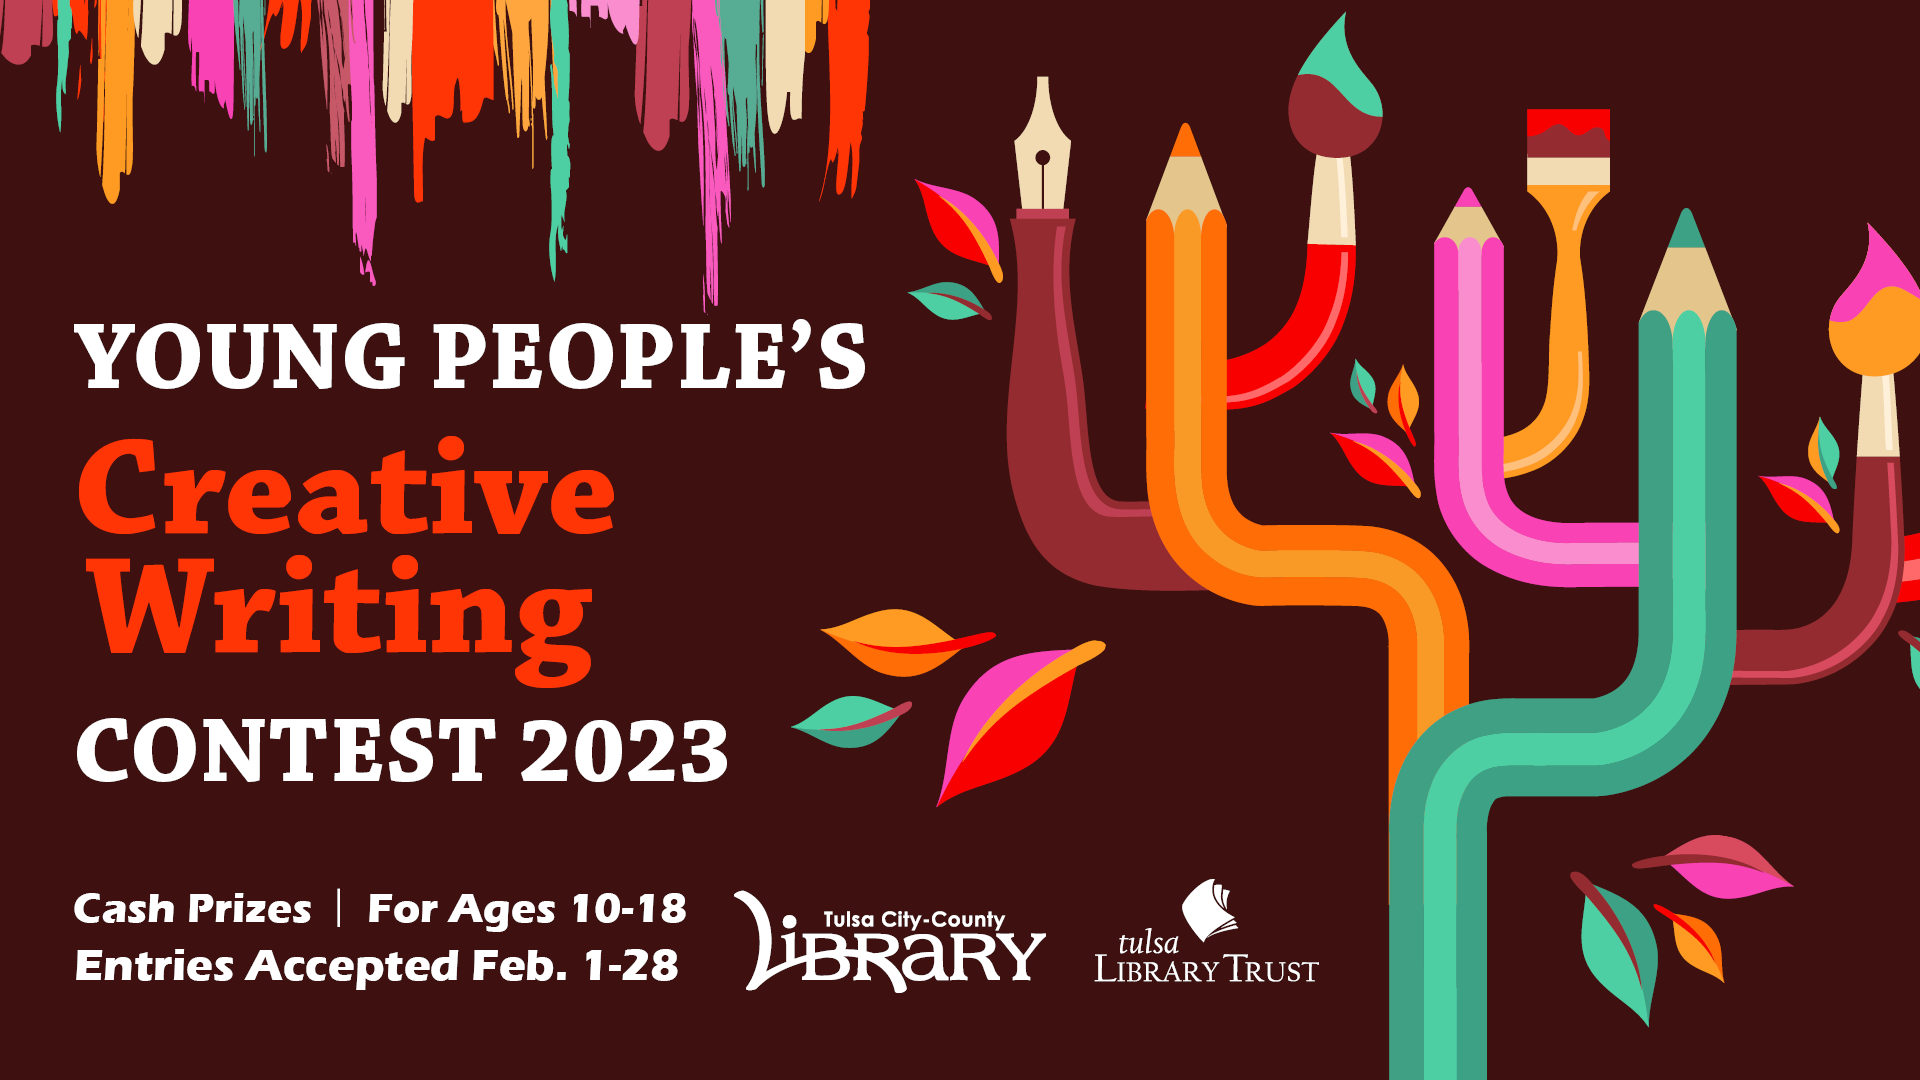 2023 Young People's Creative Writing Contest promotional graphic - a tree made of art tools on a dark red background